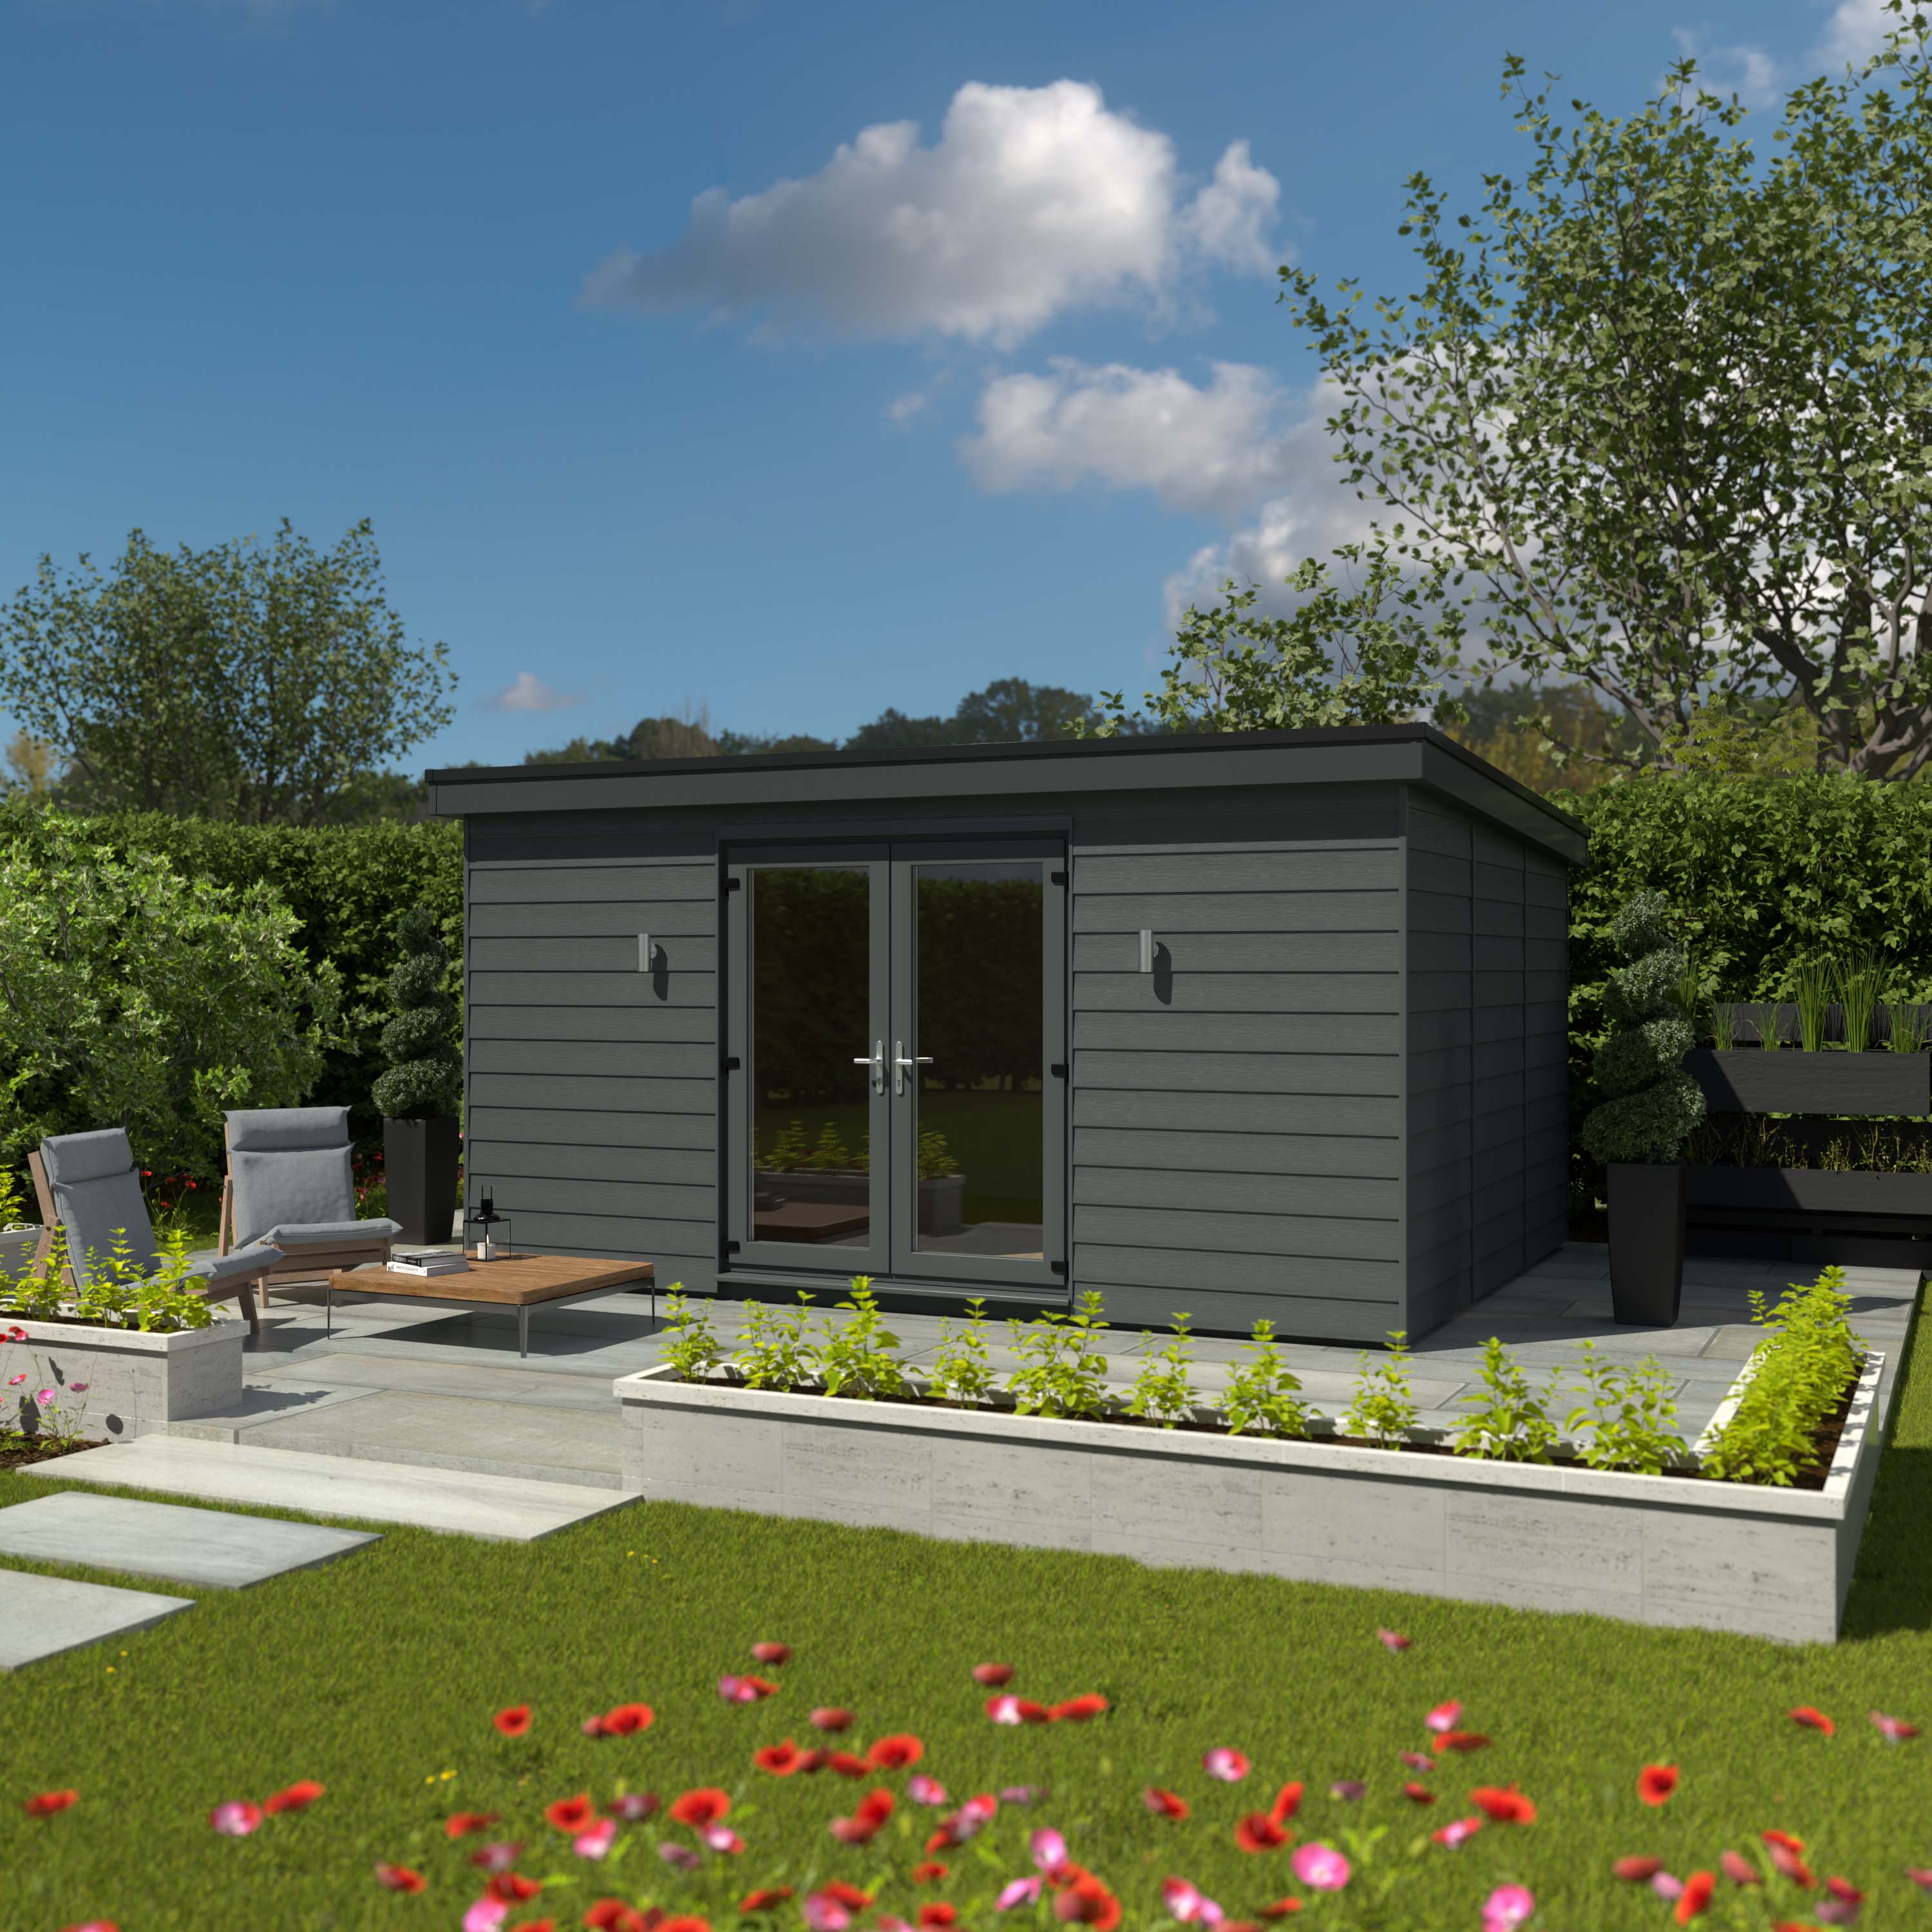 Kyube 4.96 x 3.74m Composite Horizontally Cladded Garden Room including Installation - Anthracite Grey